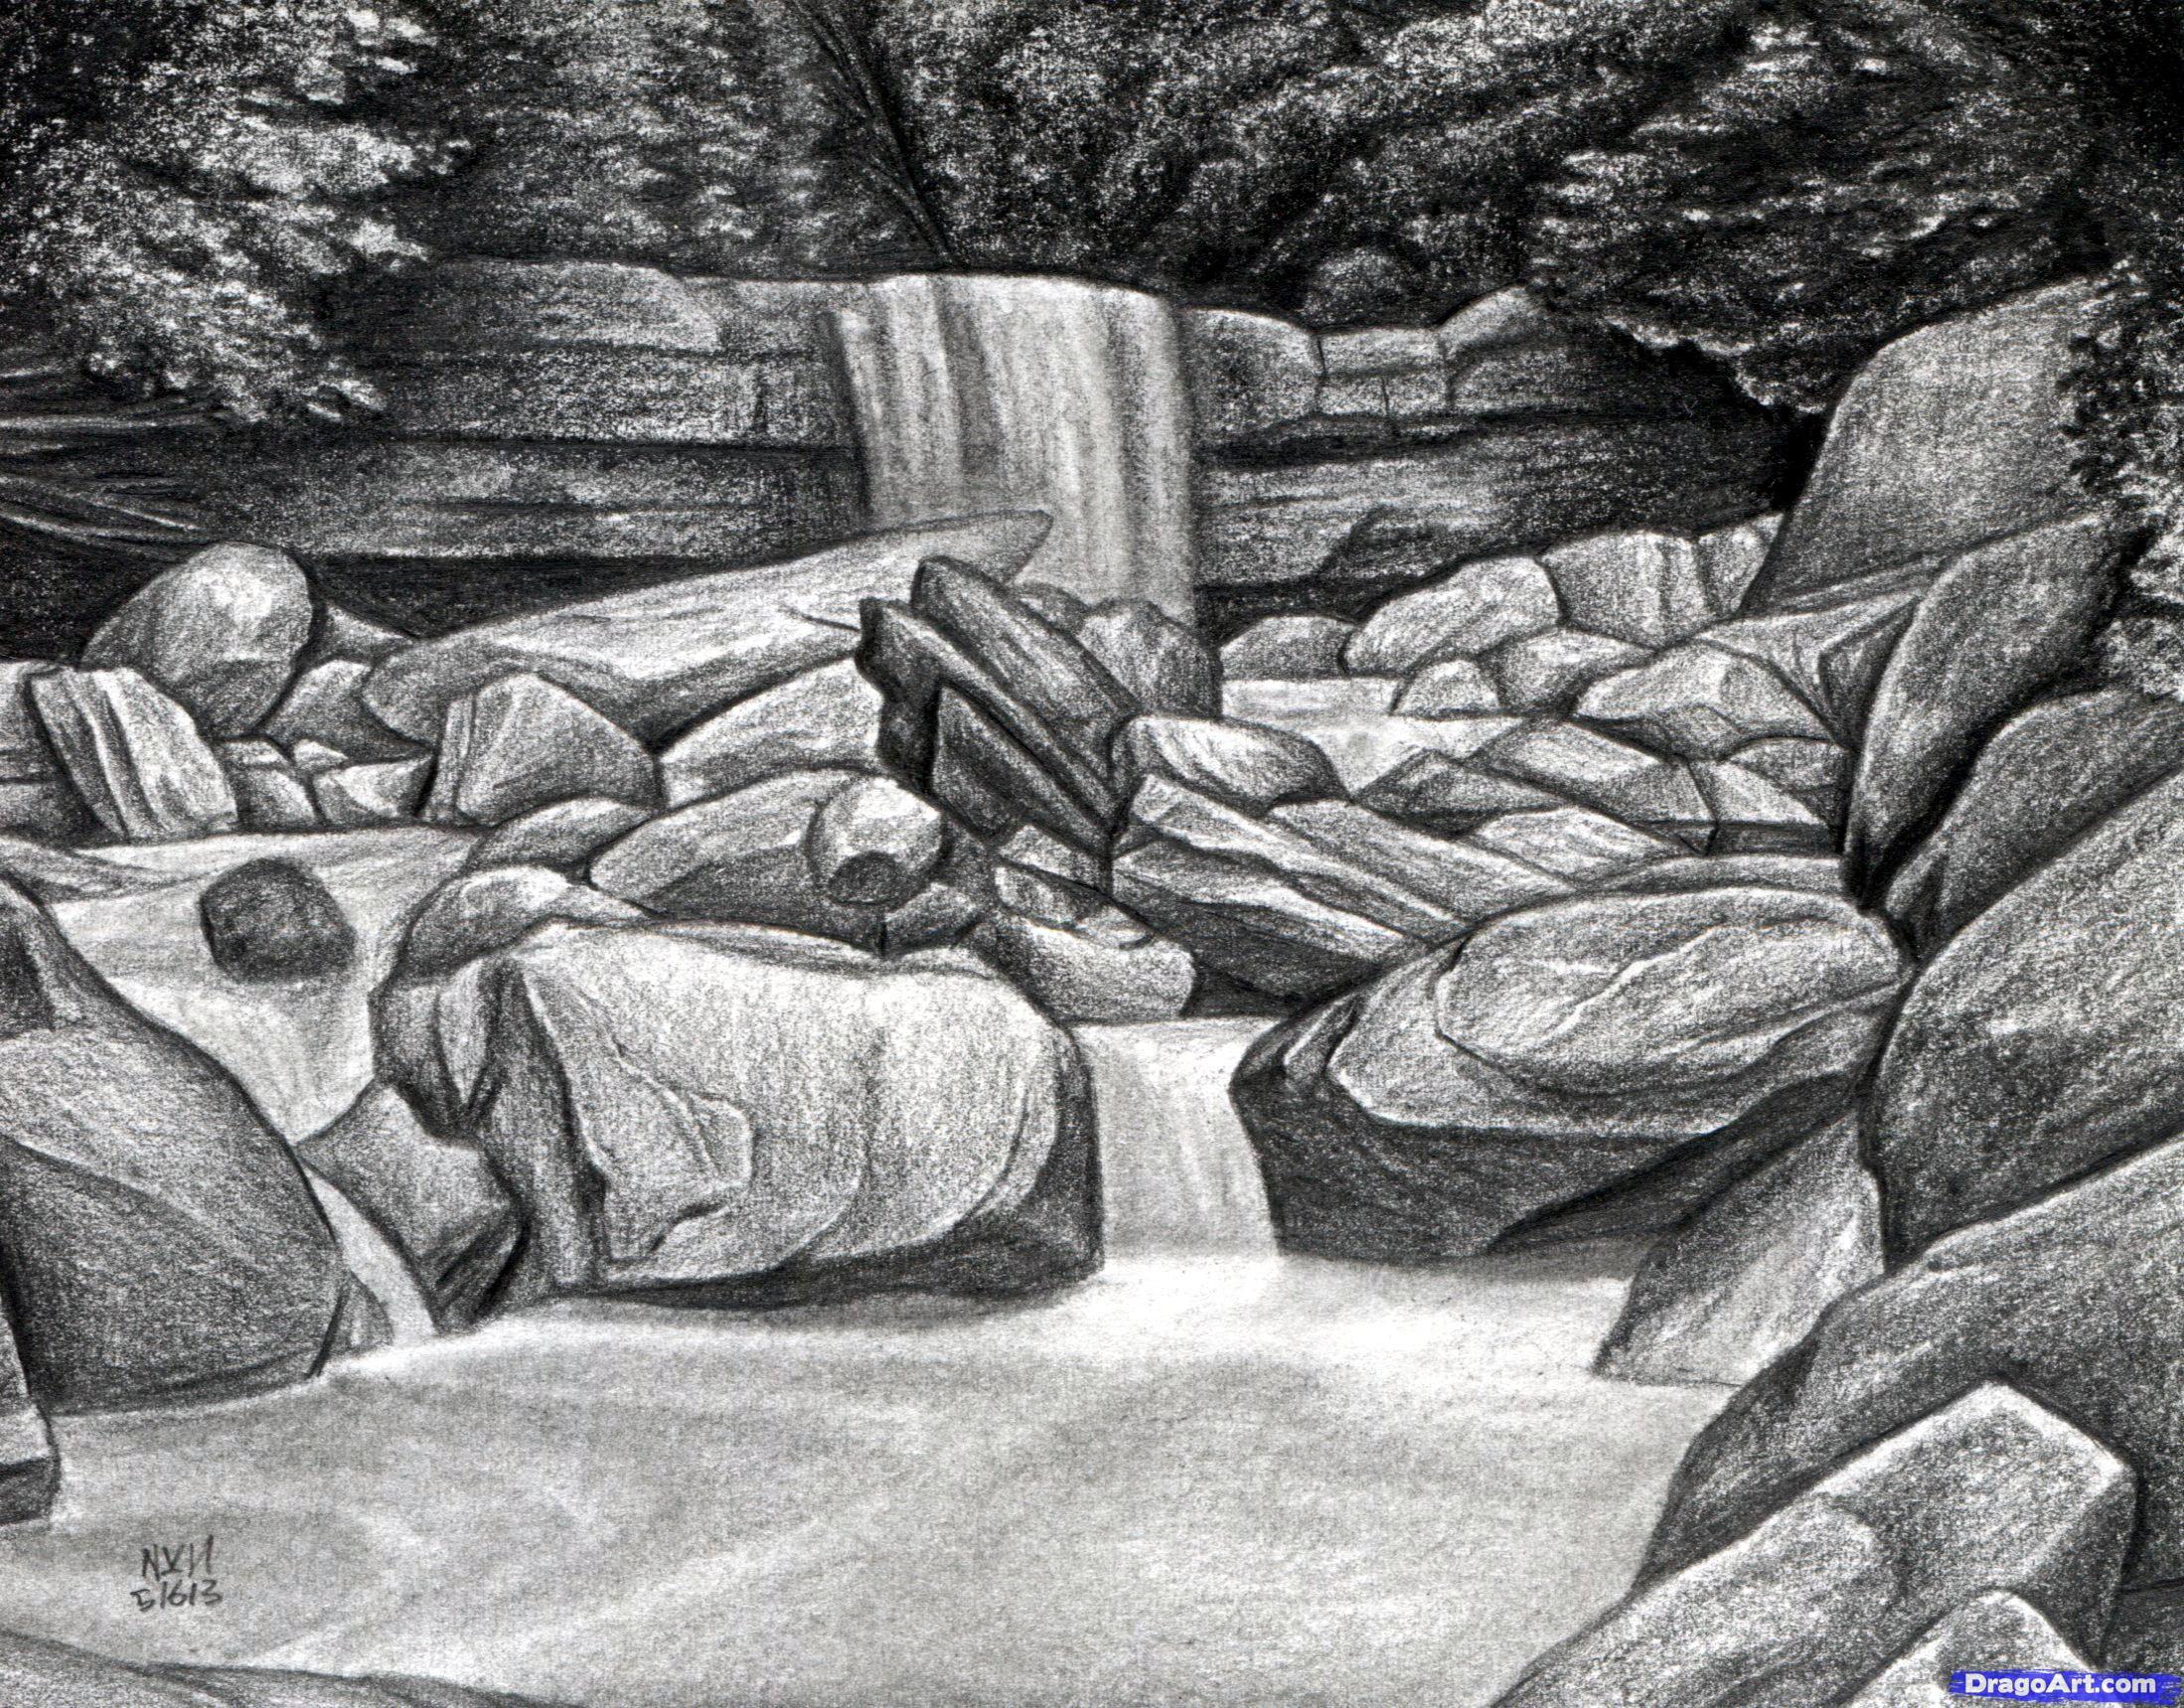 Waterfall Pencil Sketch - How To Draw A Realistic Waterfall With Pencil ...